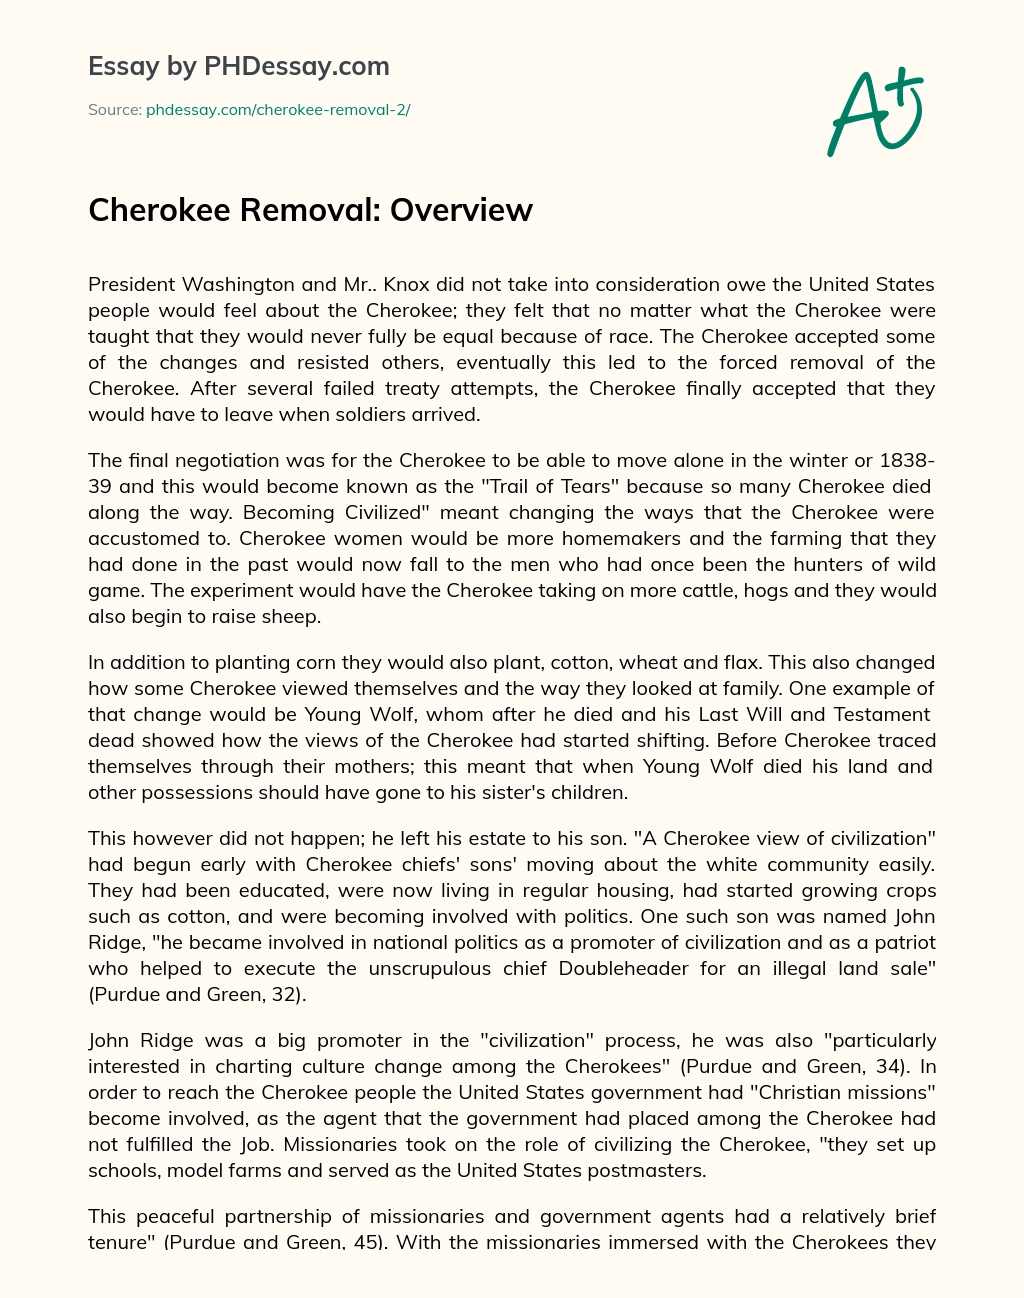 Cherokee Removal: Overview essay